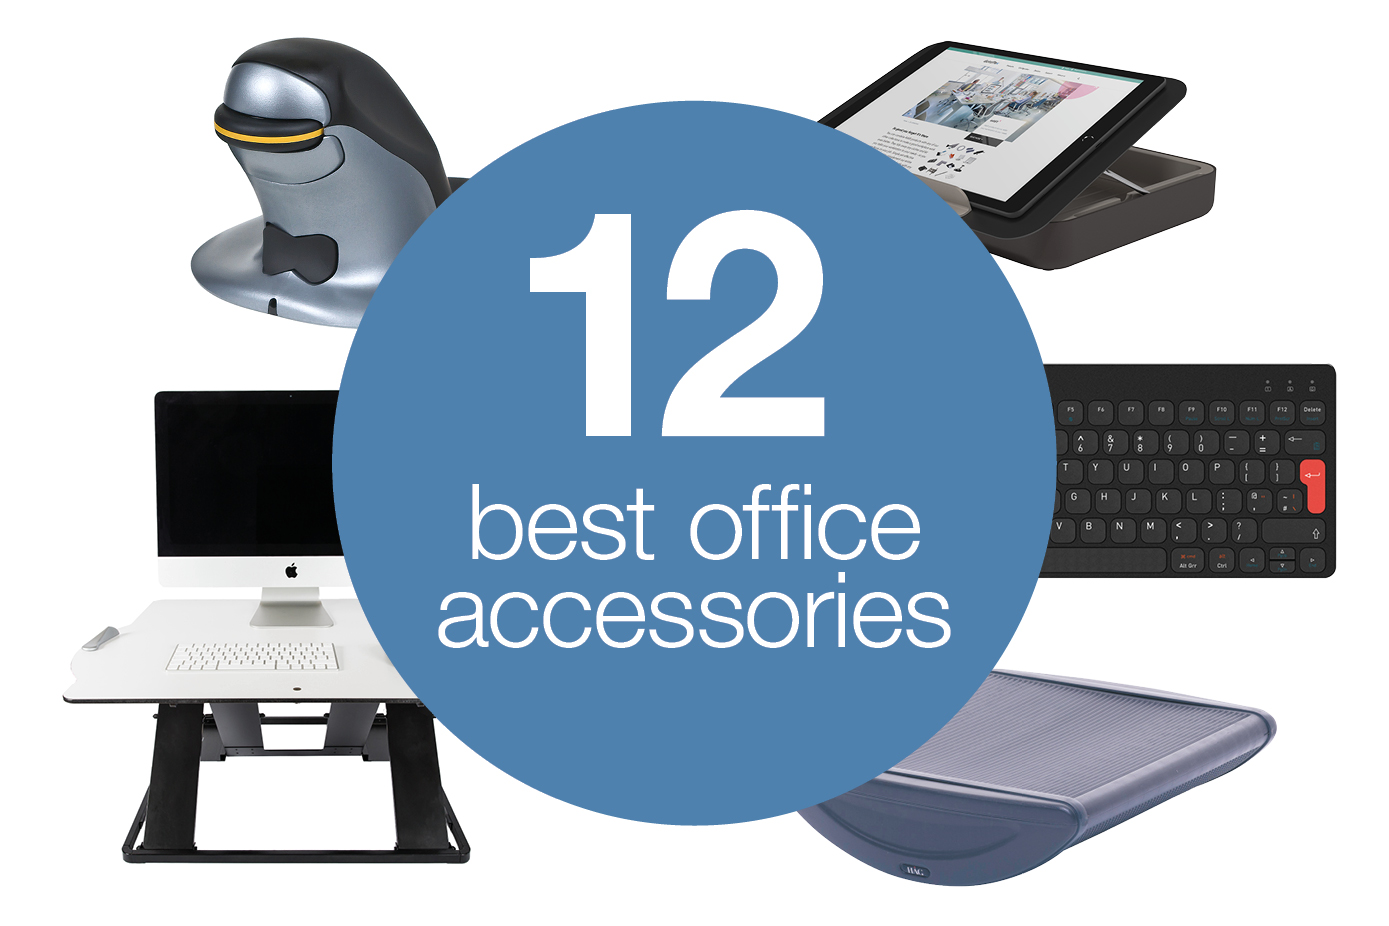 The 12 best office accessories: how many do you have? | Blog